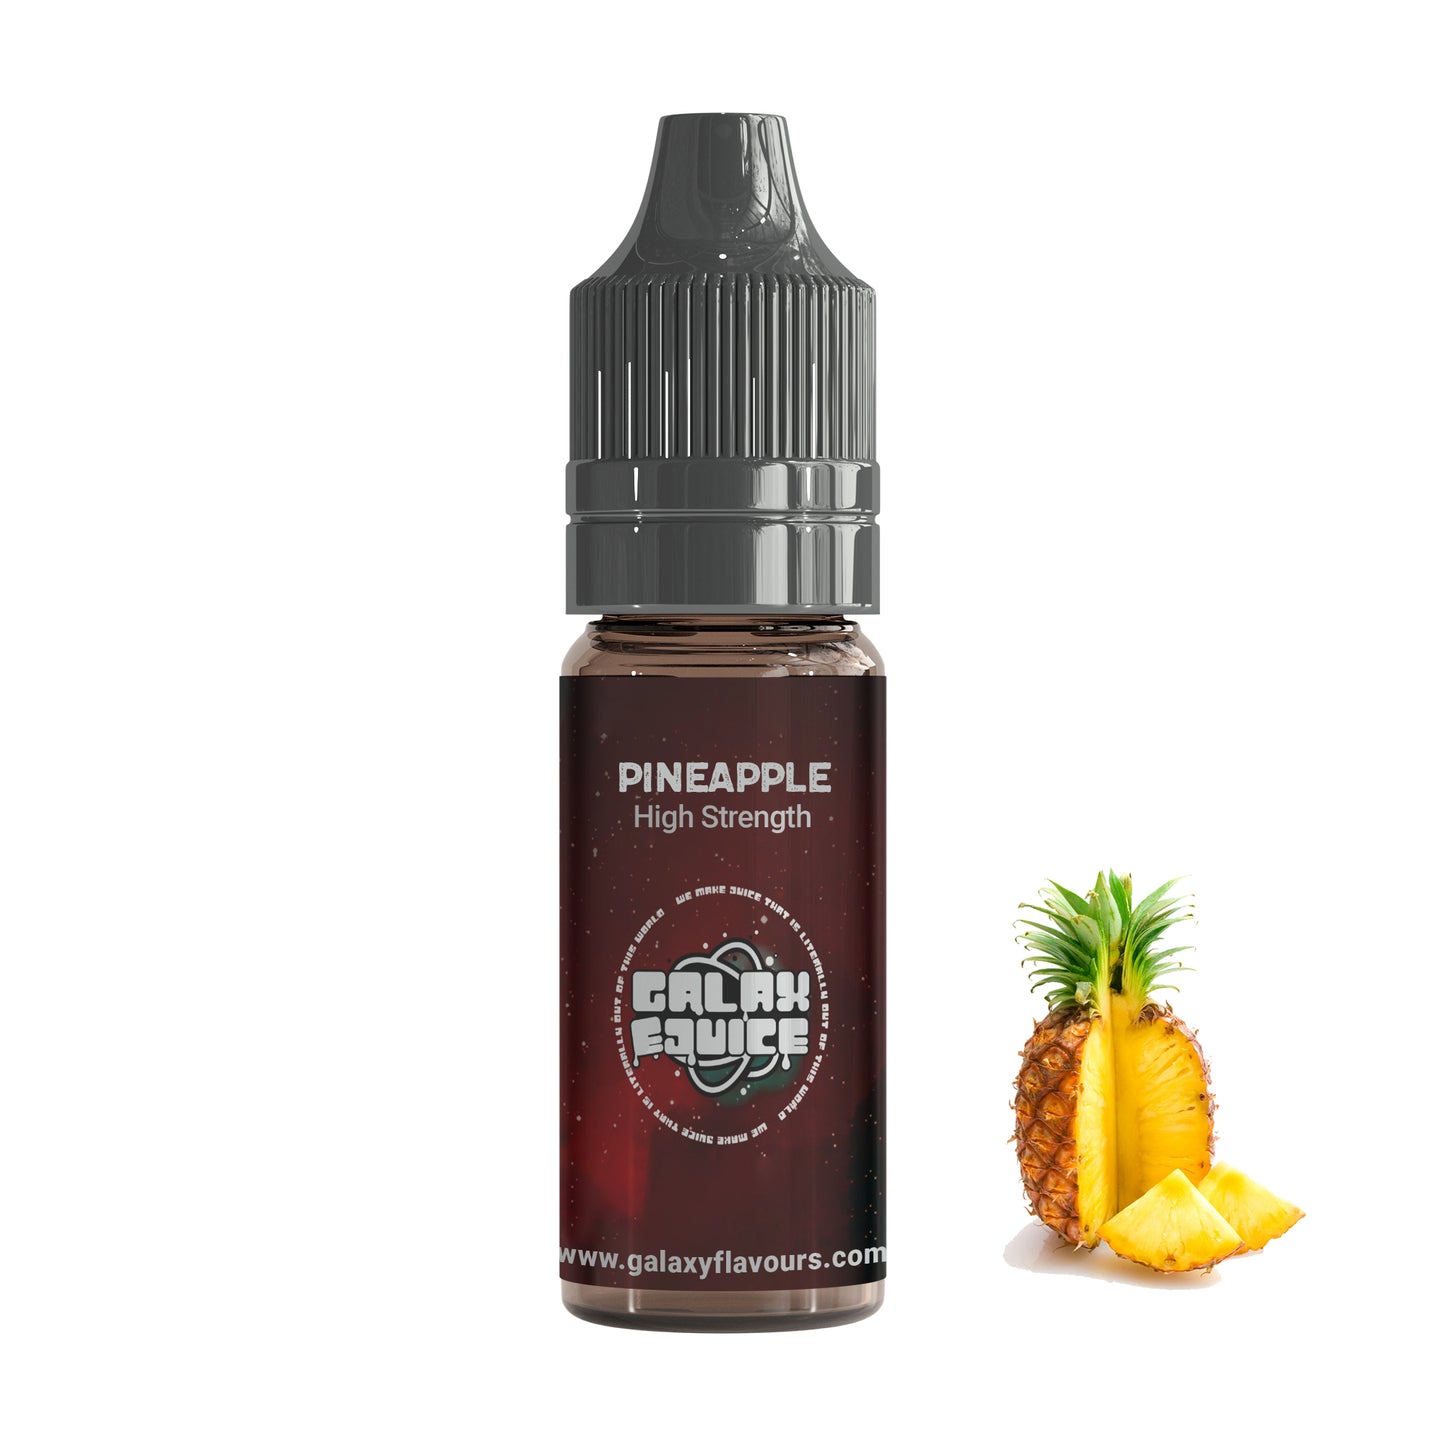 Pineapple (Juicy) High Strength Professional Flavouring.